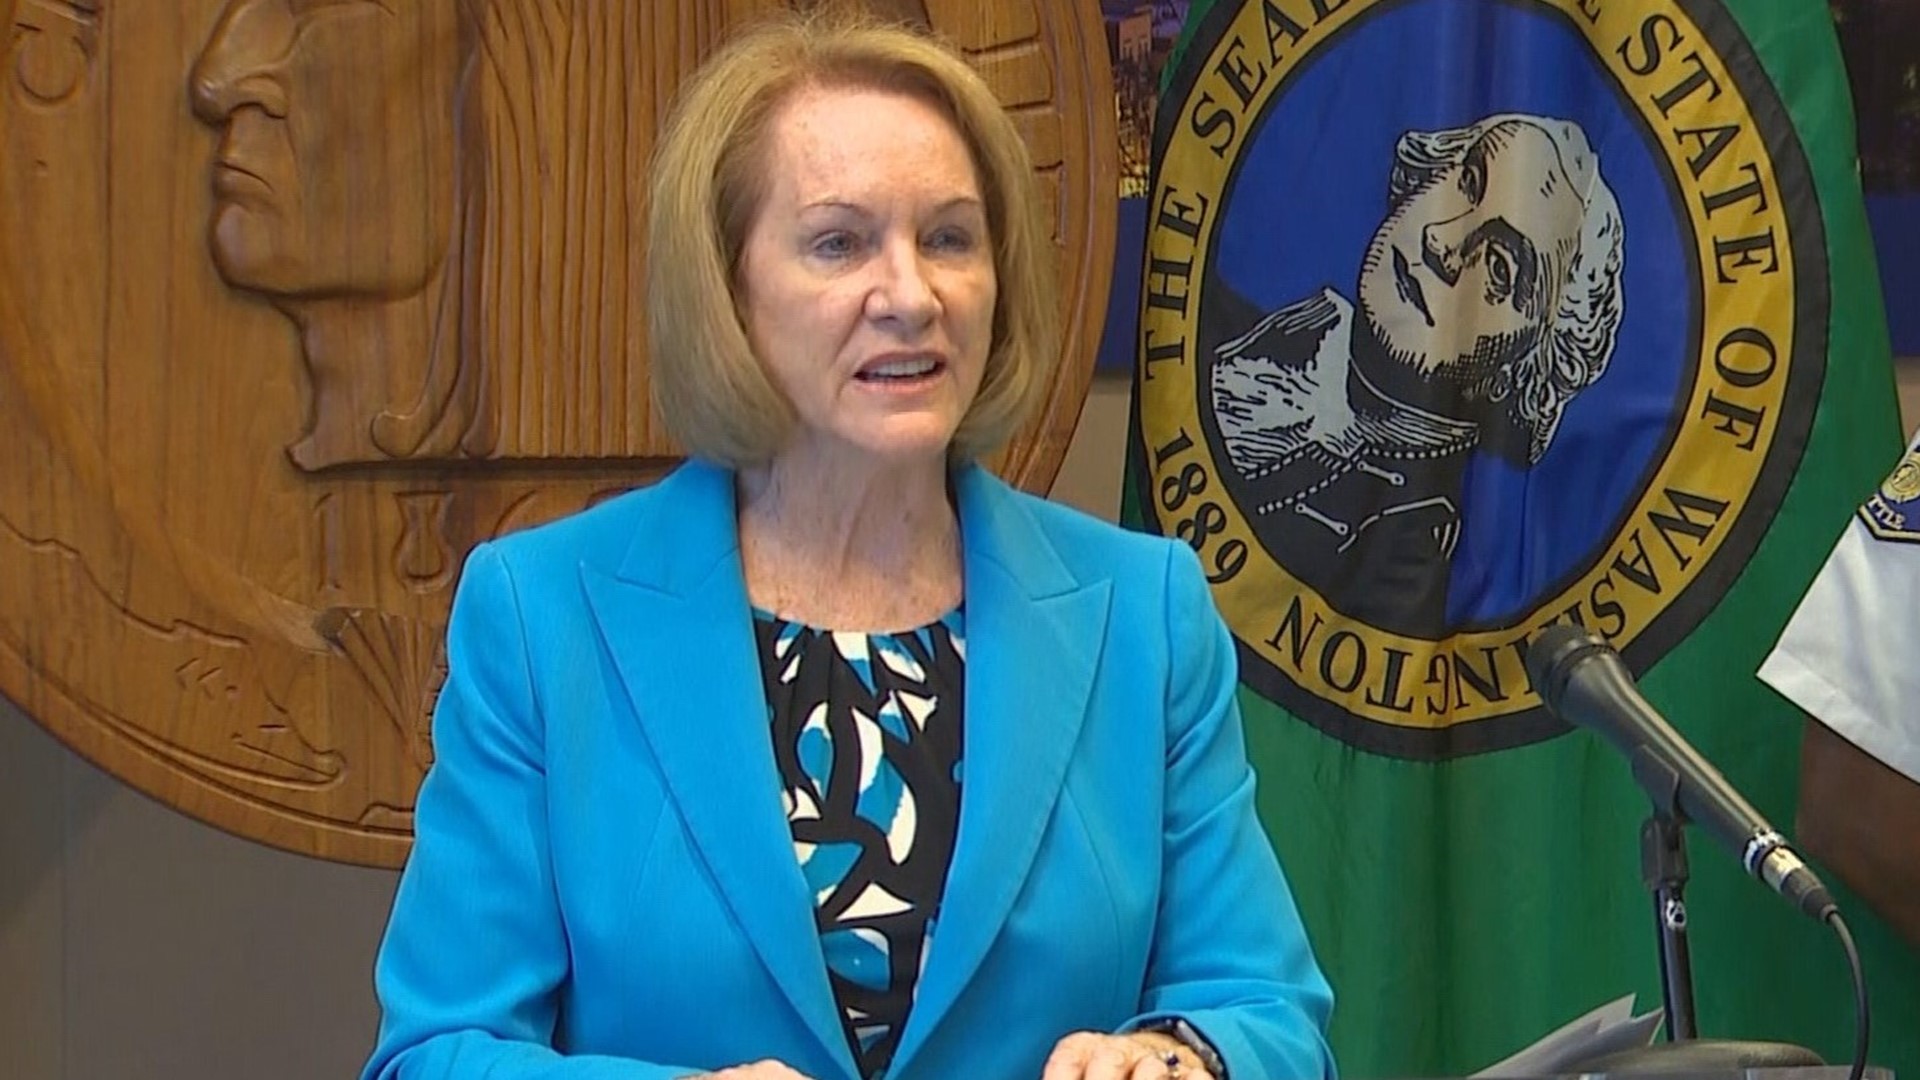 Those behind the petition accuse Mayor Jenny Durkan of endangering people by allowing police to use tear gas and other crowd-control weapons on protesters.